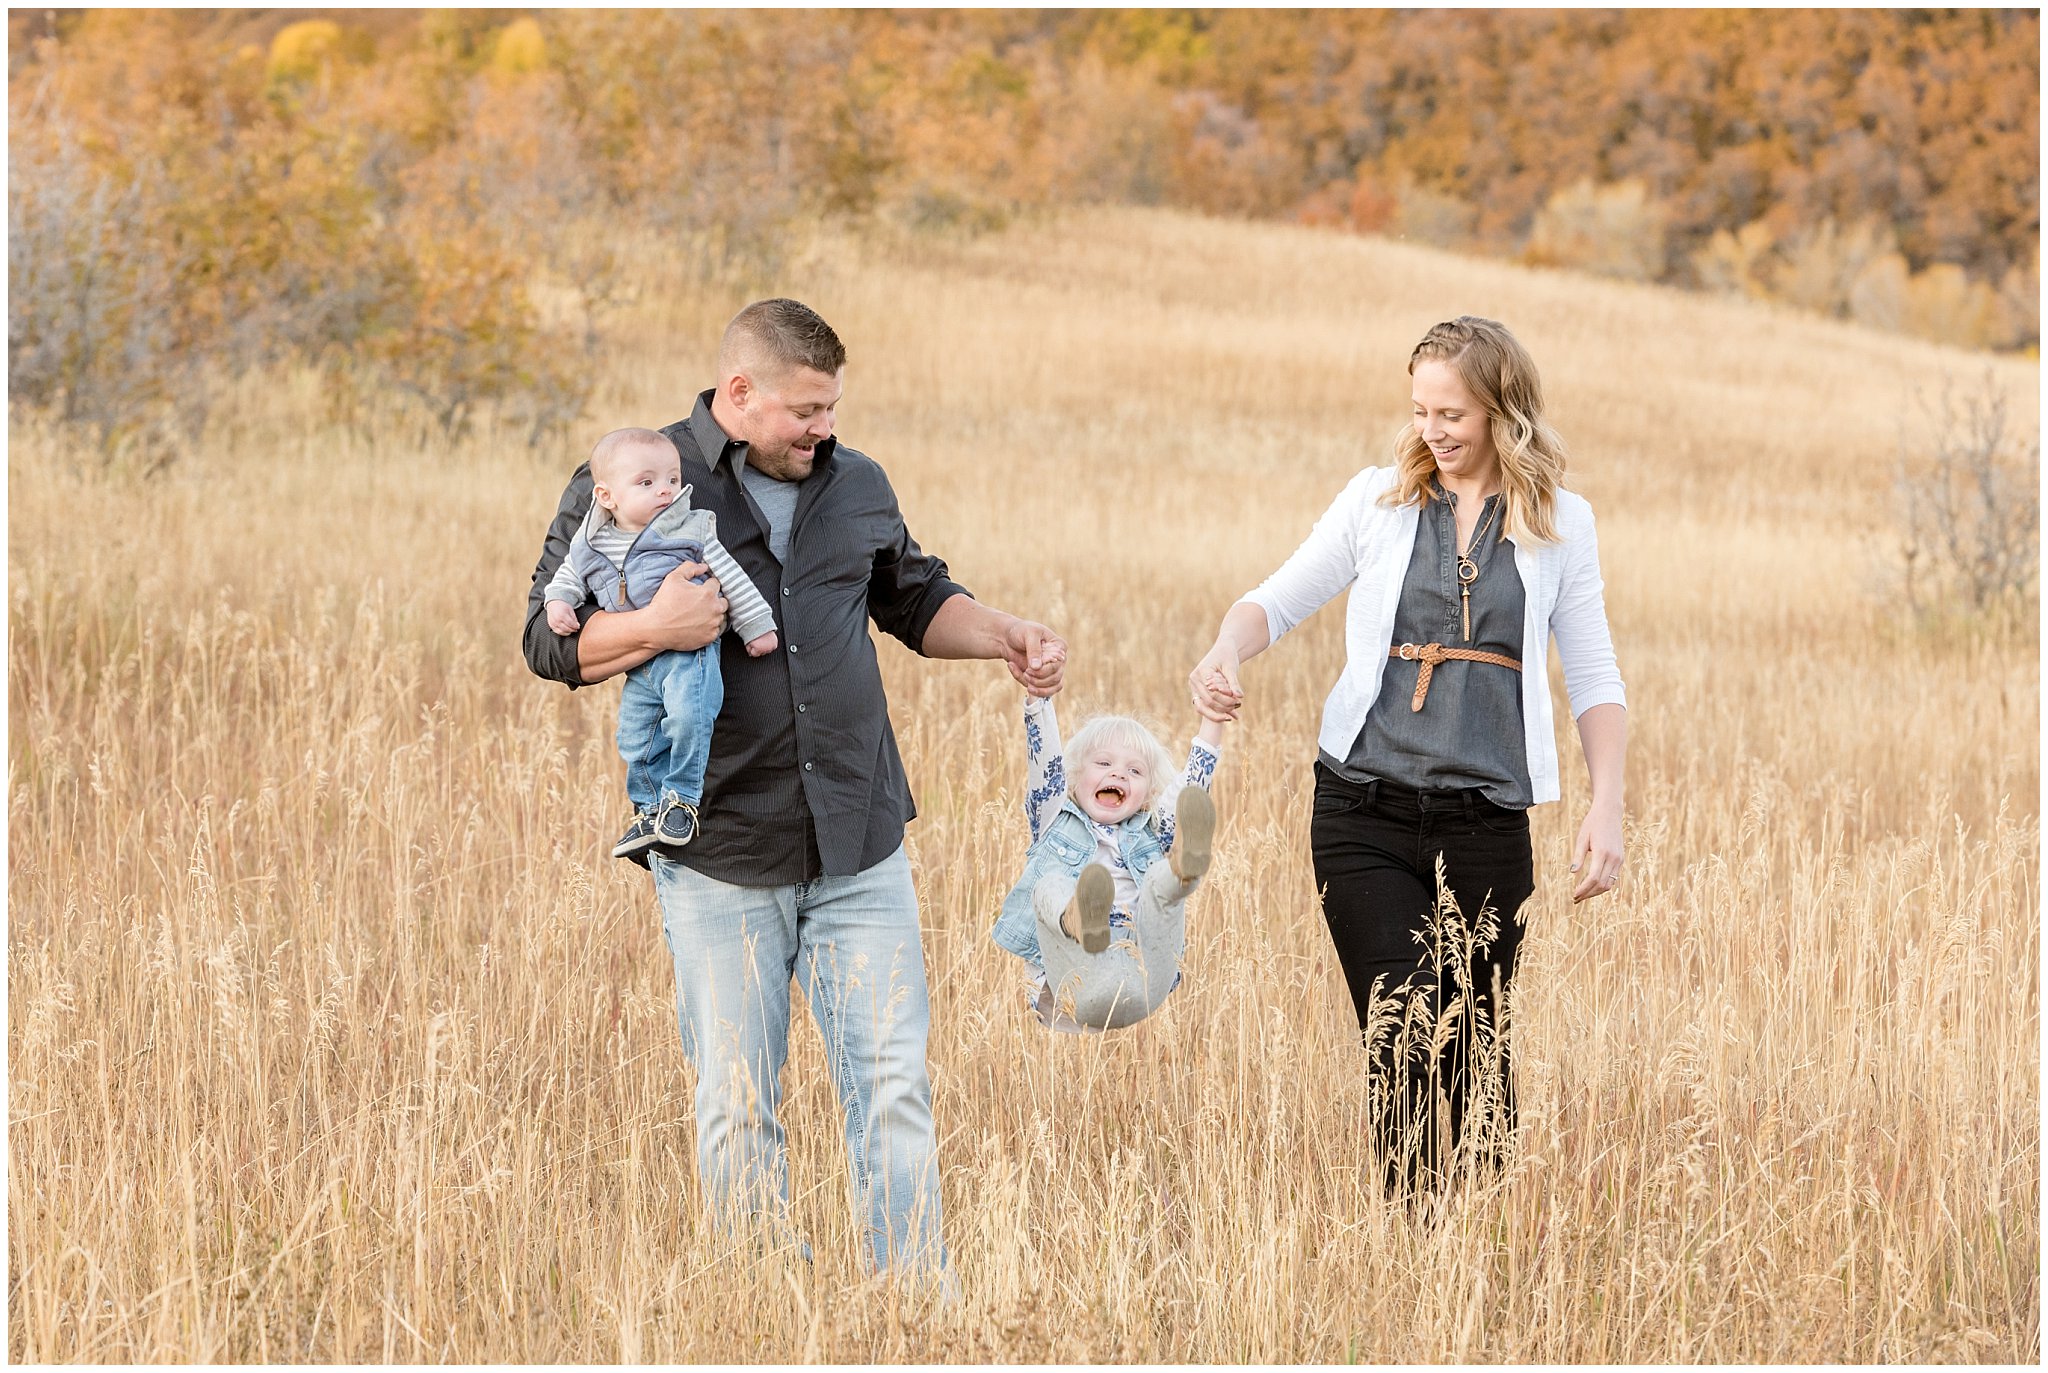 family pictures in a field | At snowbasin resort in Utah